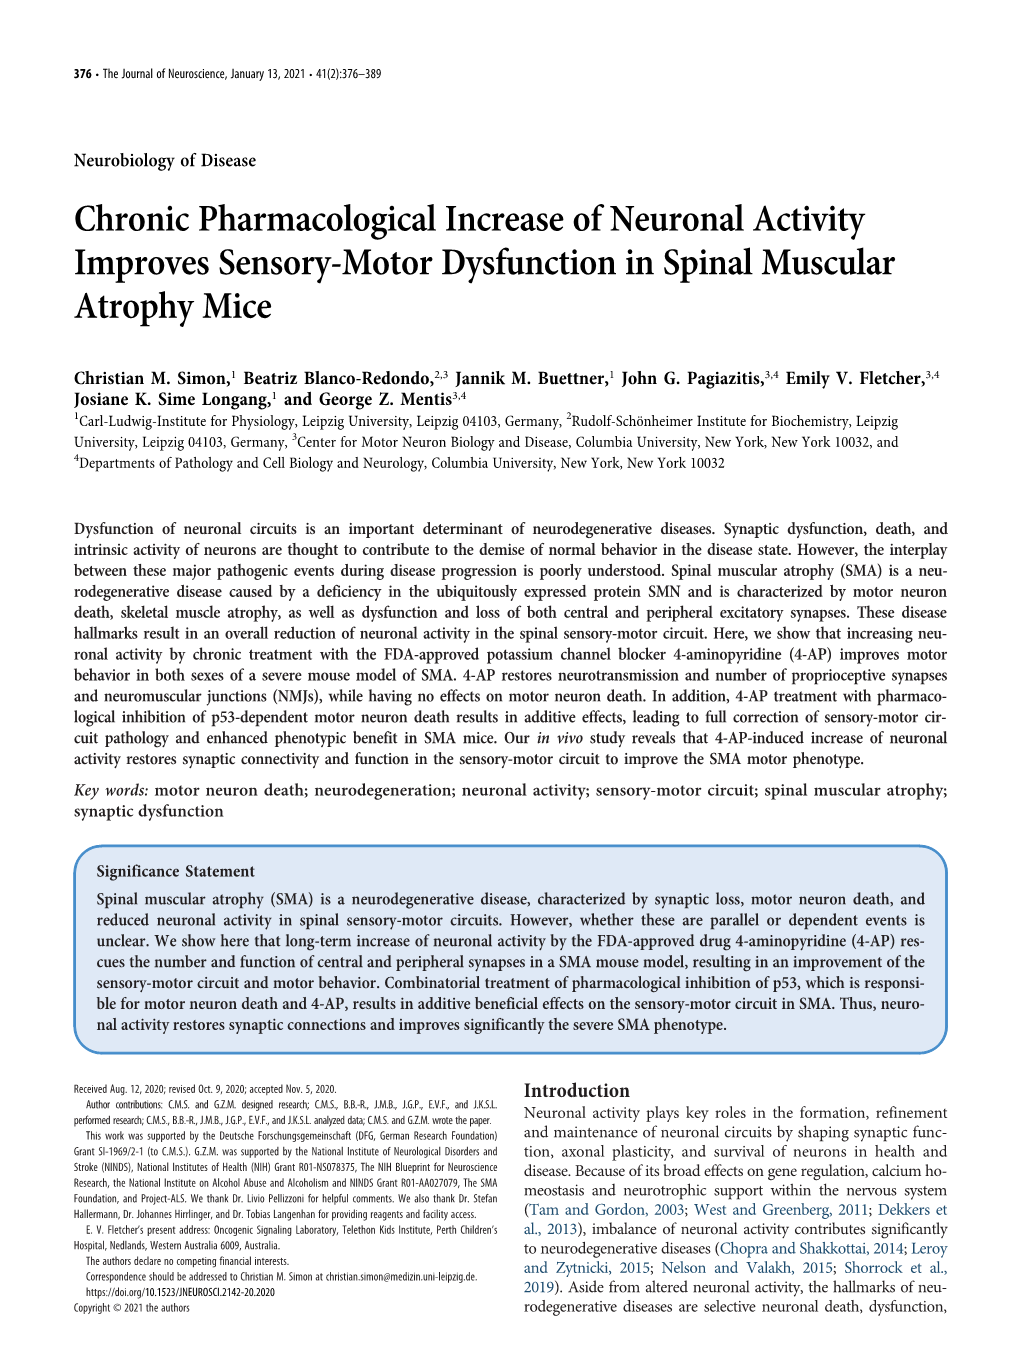 Chronic Pharmacological Increase of Neuronal Activity Improves Sensory-Motor Dysfunction in Spinal Muscular Atrophy Mice